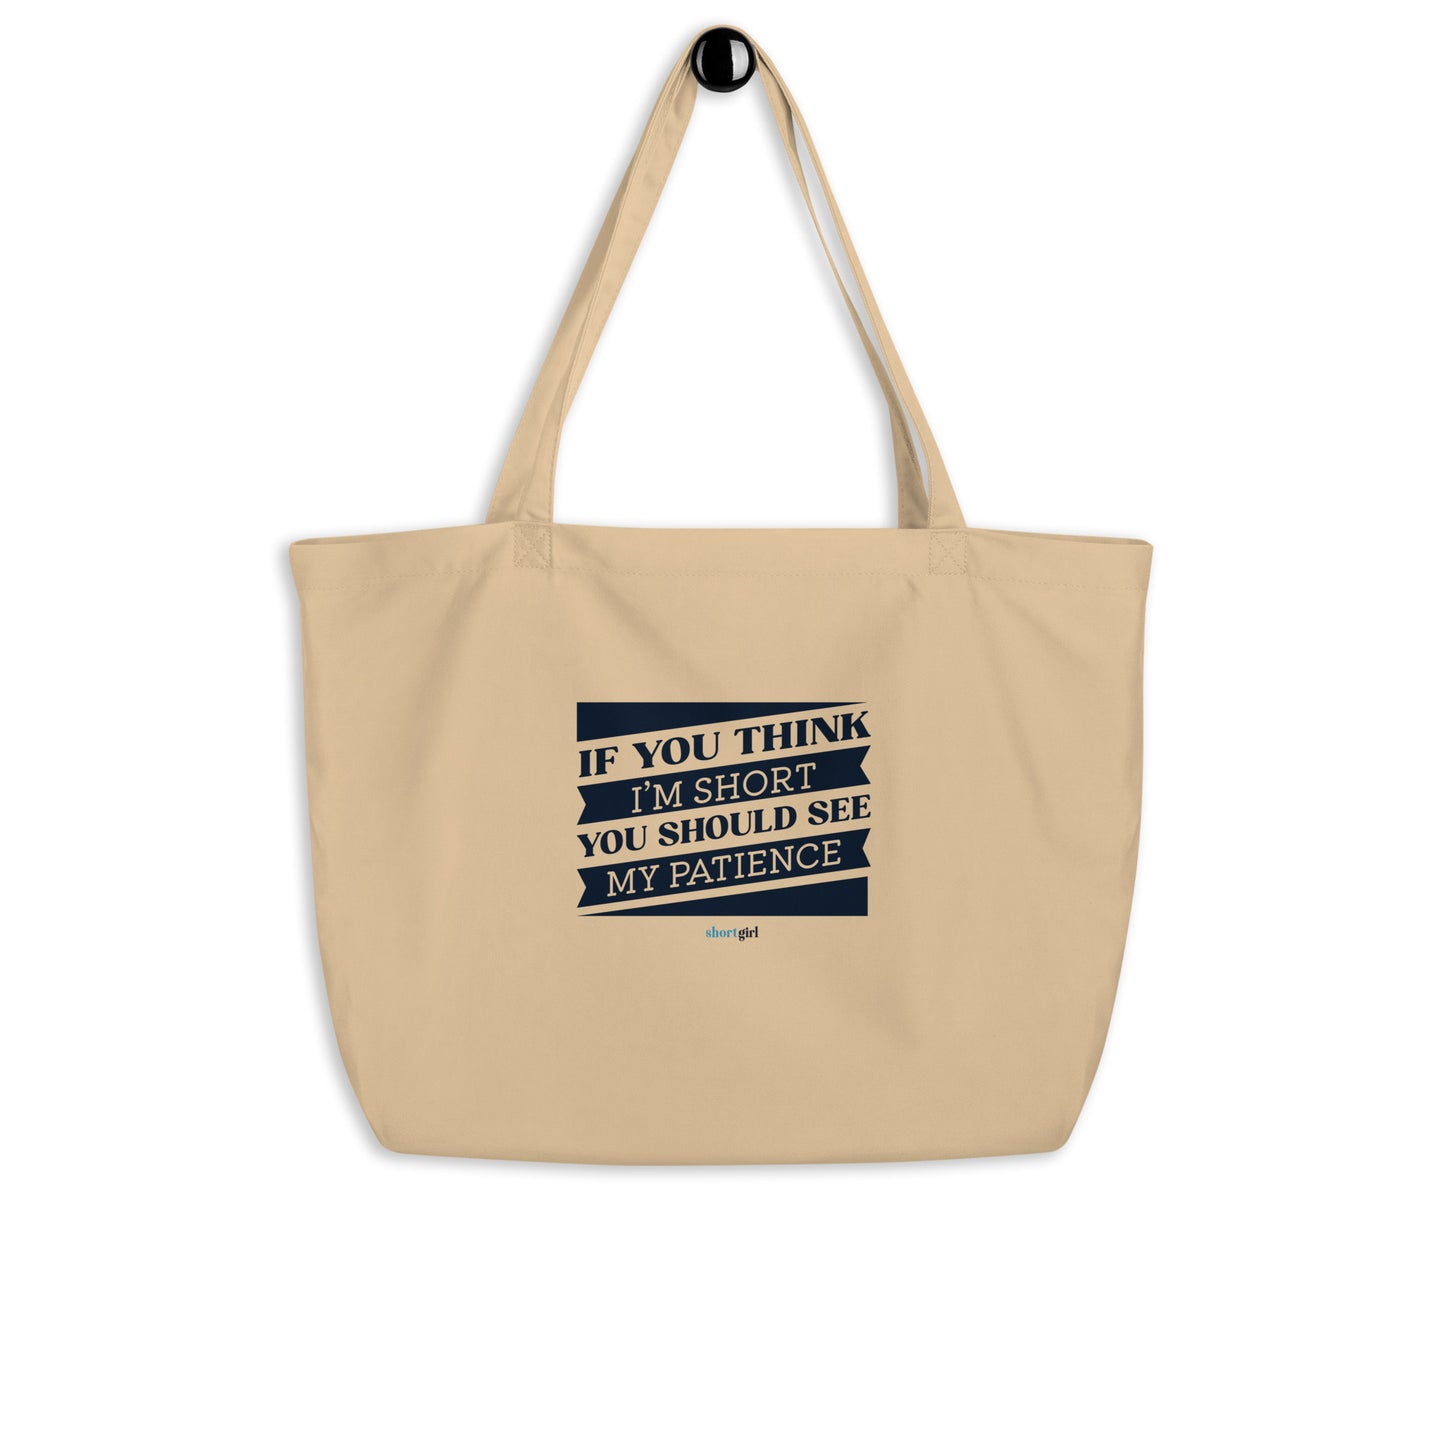 Large organic tote bag - If you think I'm short, you should see my patience